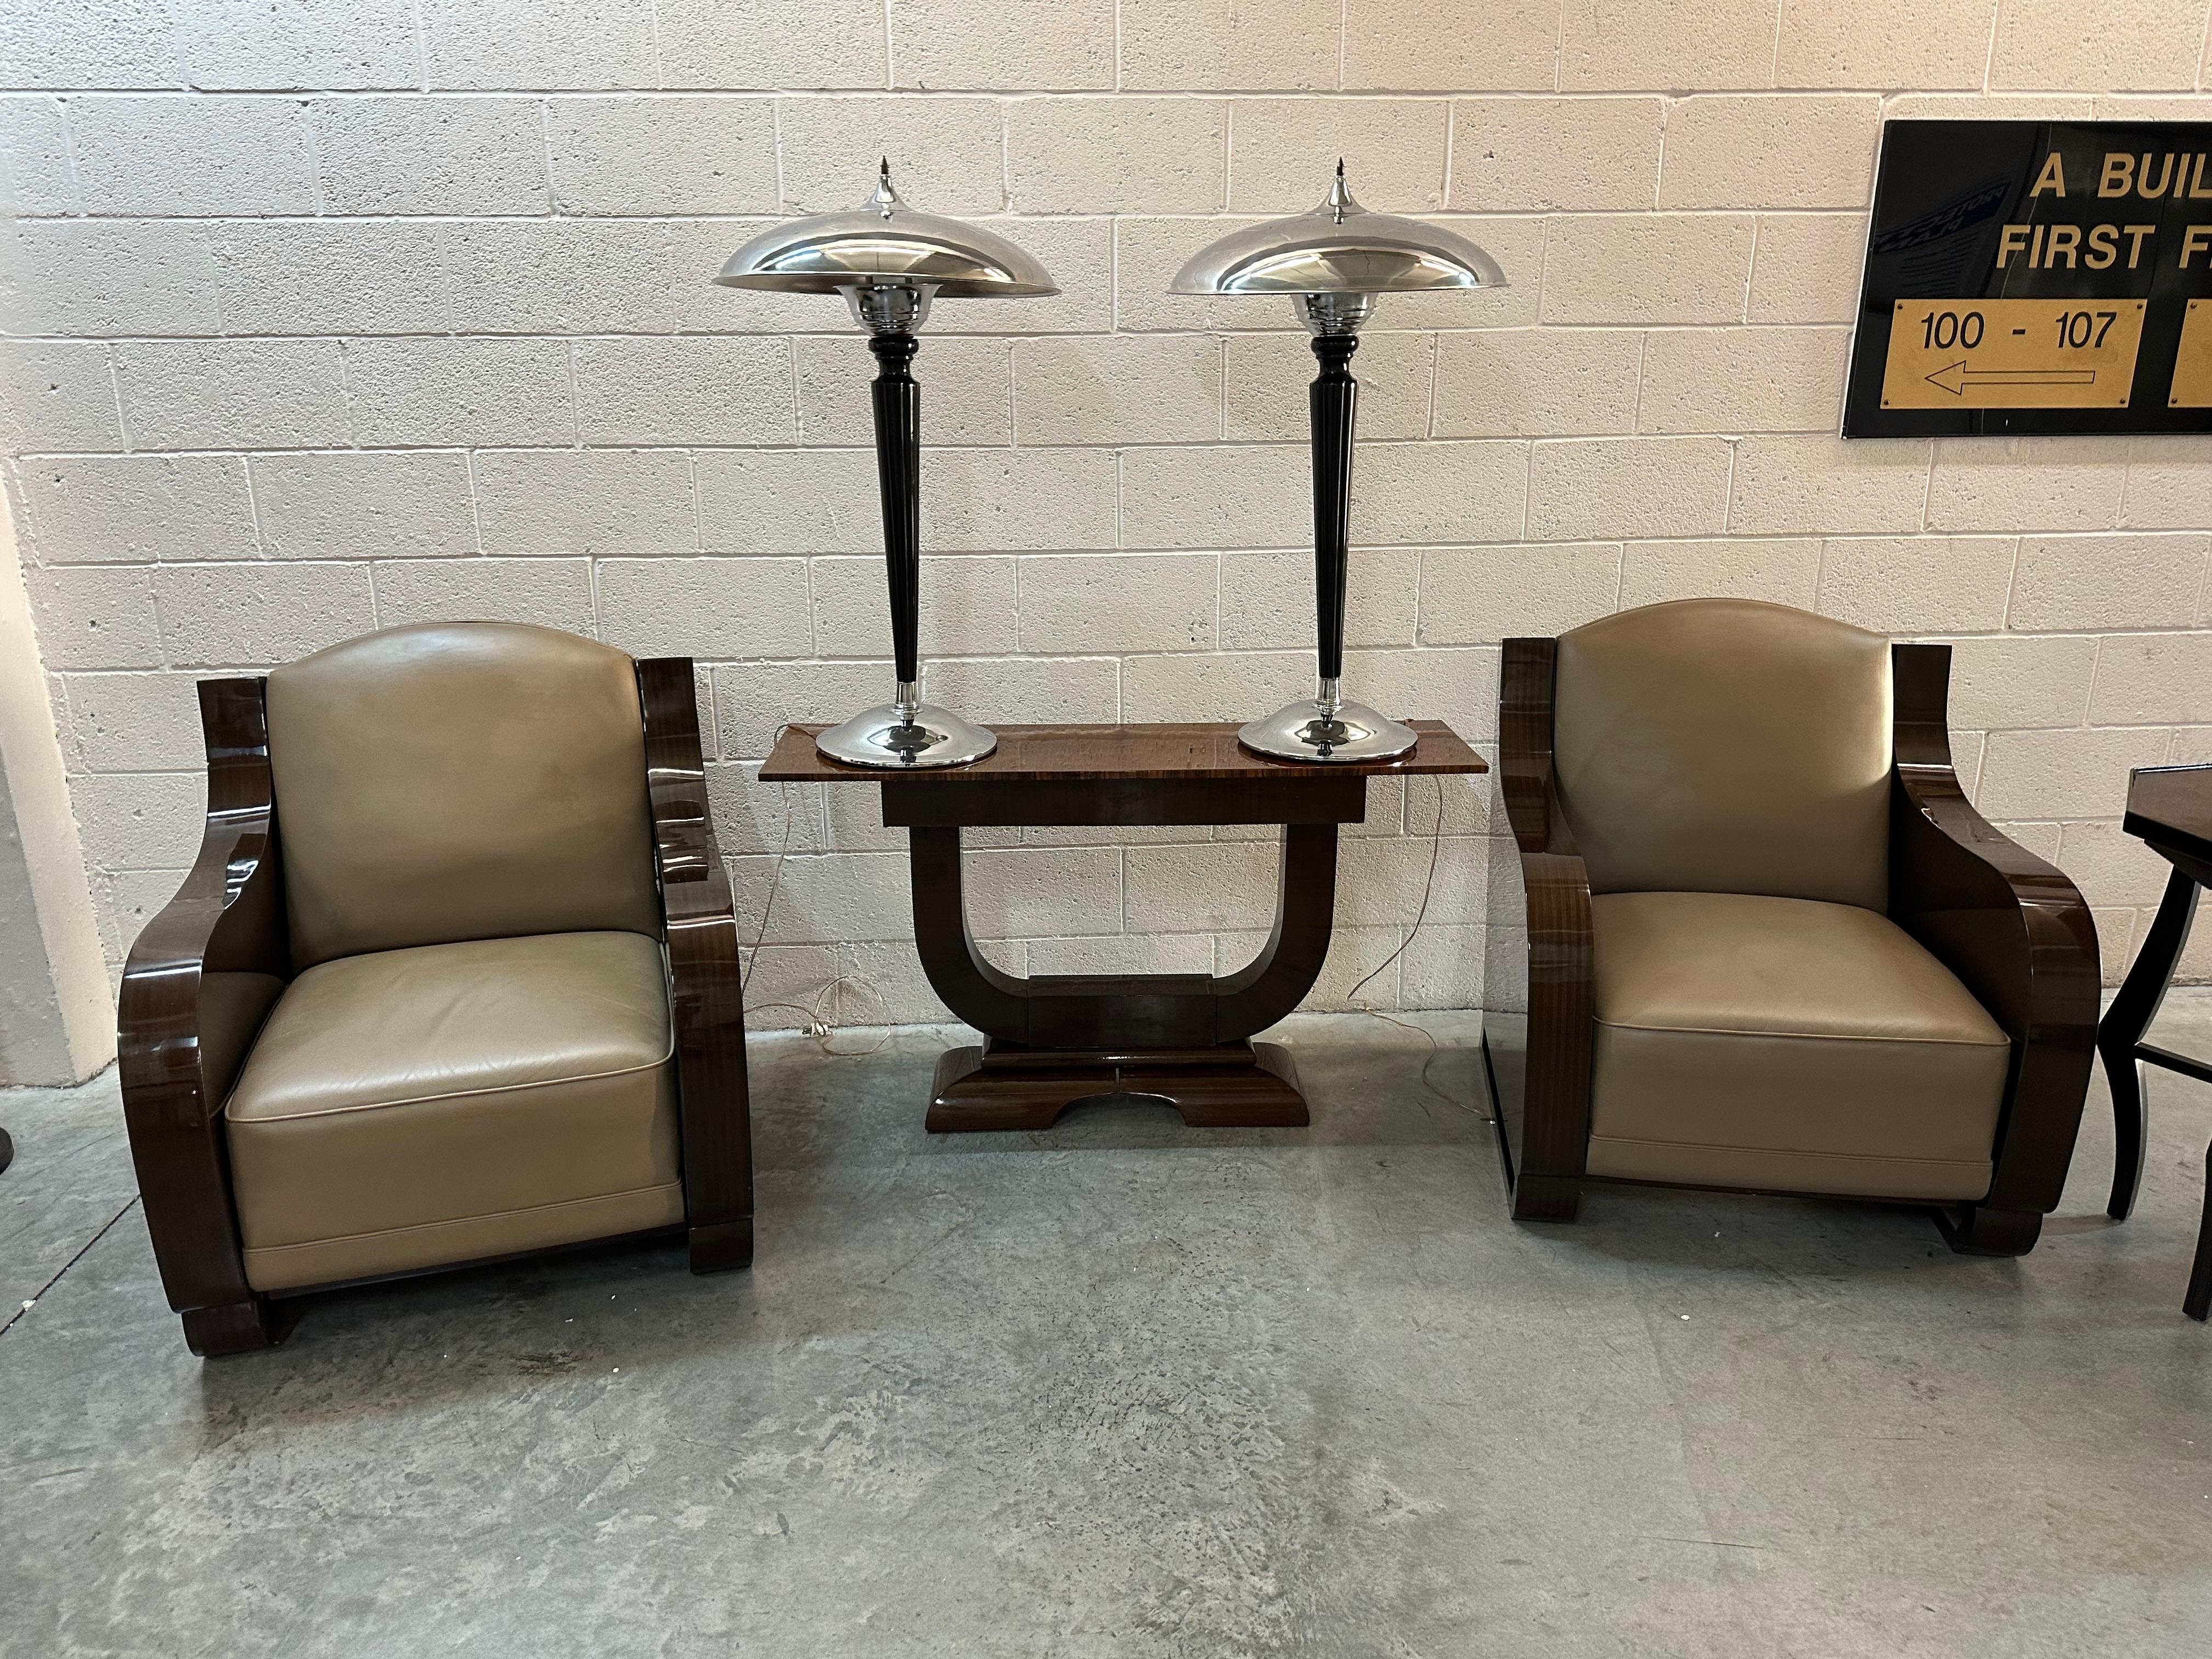 Big Pair of Art Deco Lamps in wood and chrome, 1930, France For Sale 8